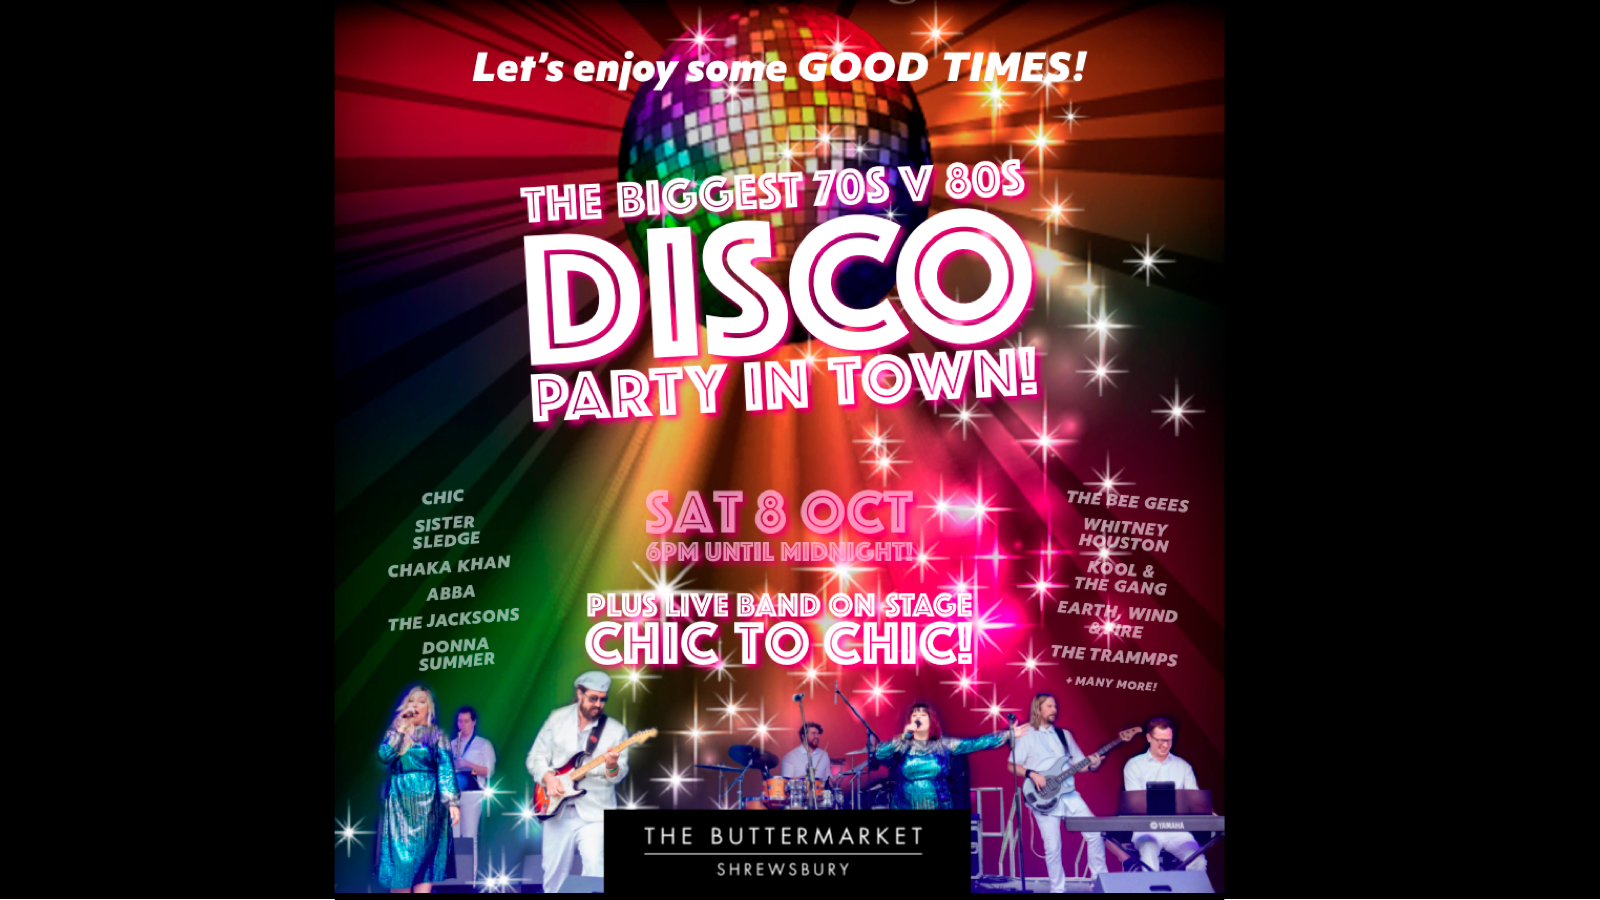 THE BIGGEST 70s V 80s DISCO IN TOWN from 6pm – ft CHIC TO CHIC live band